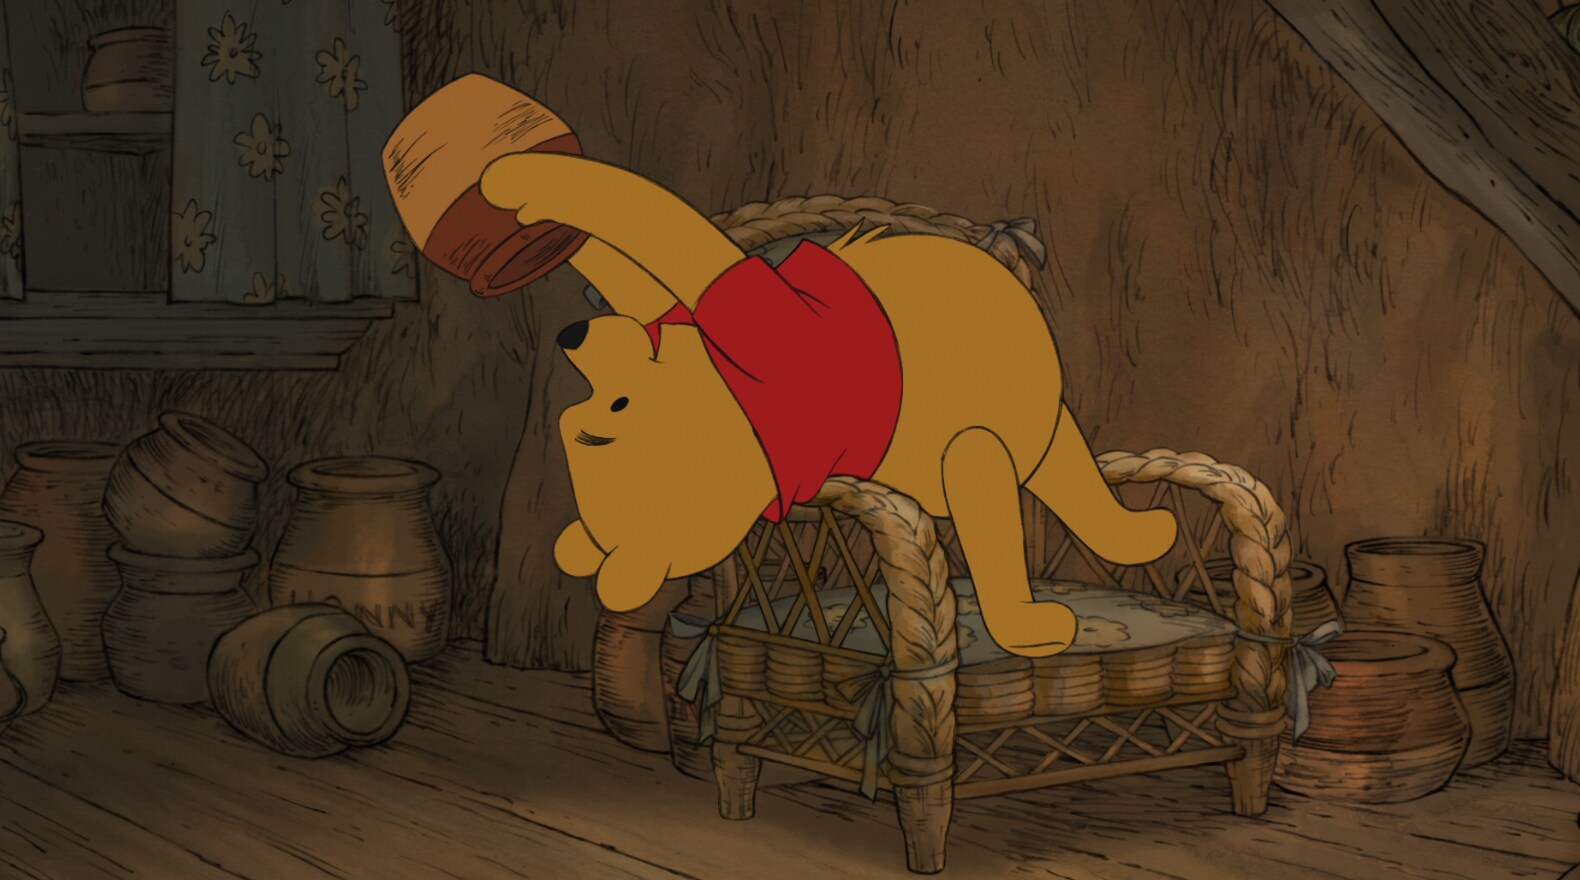 A Pooh Bear takes care of his tummy!